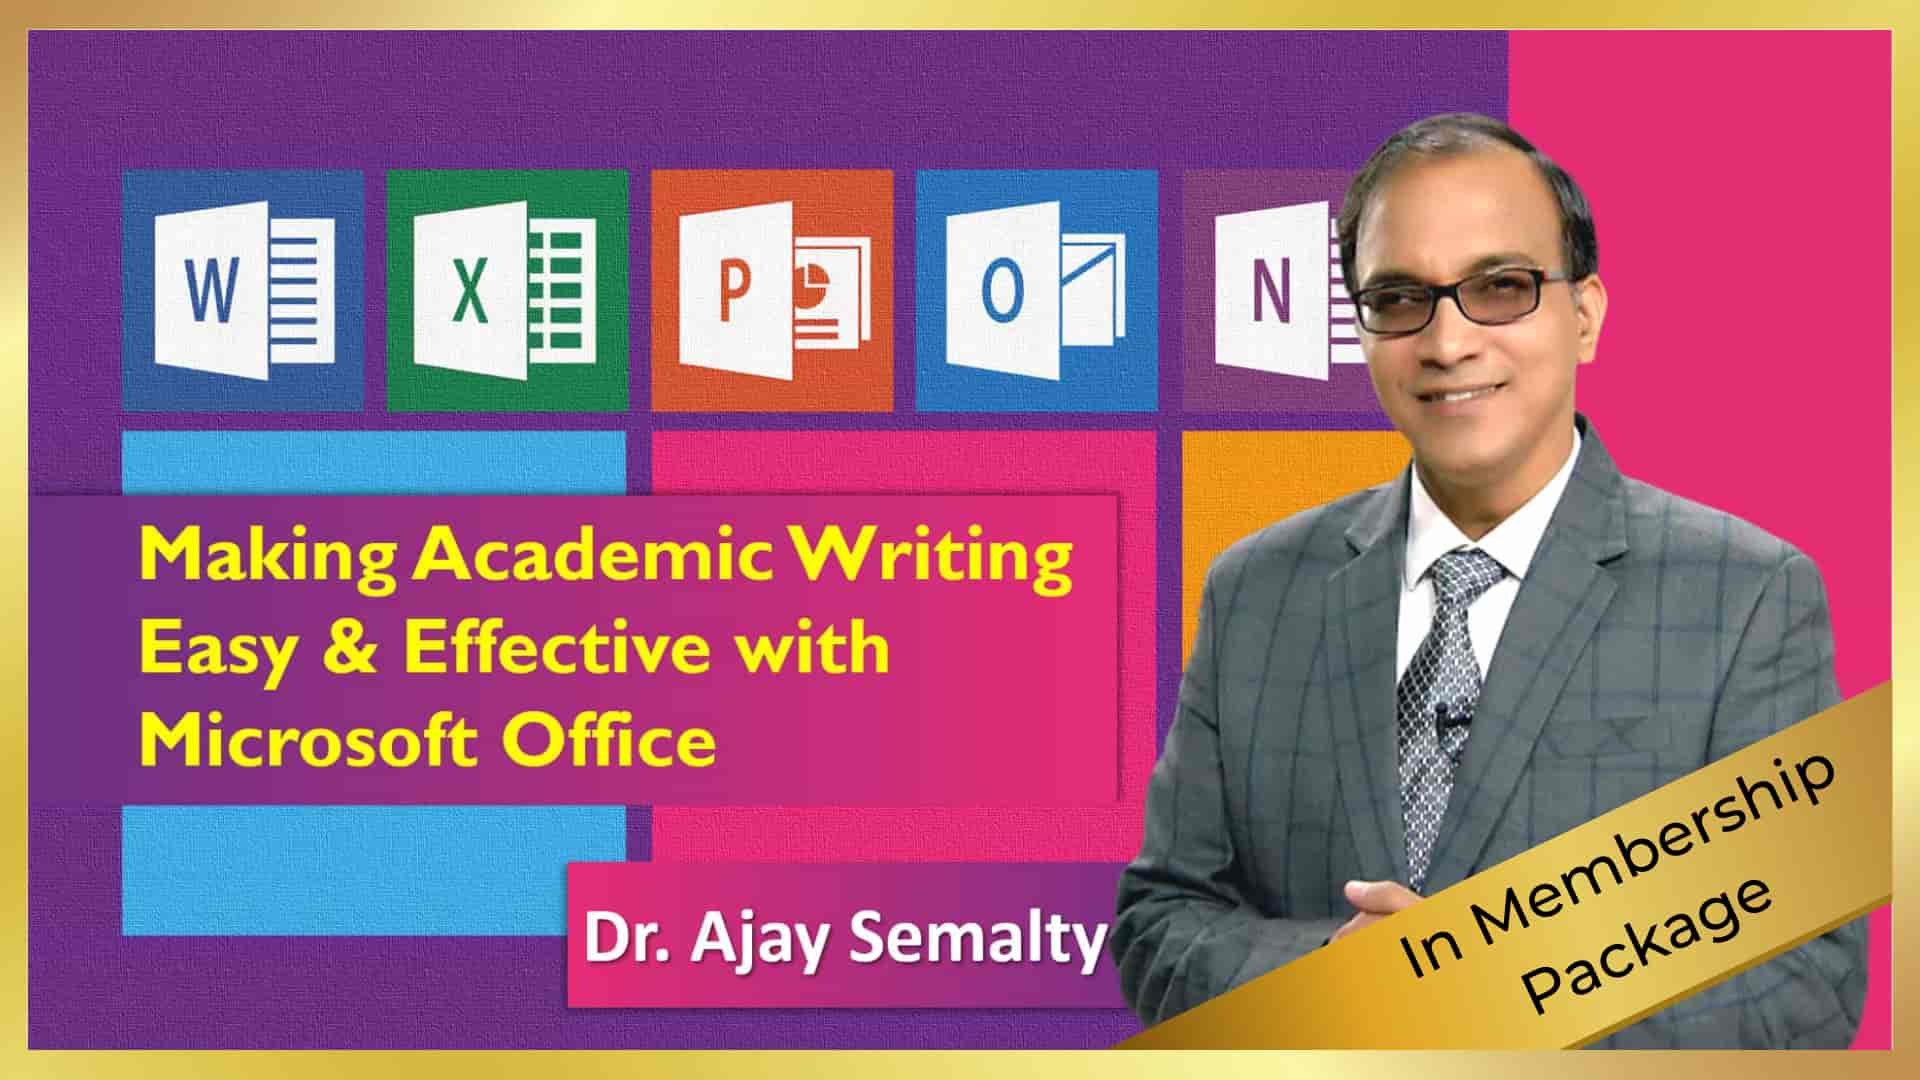 Microsoft Office Tools for Making Academic Writing Easy and Effective by Dr Ajay Semalty